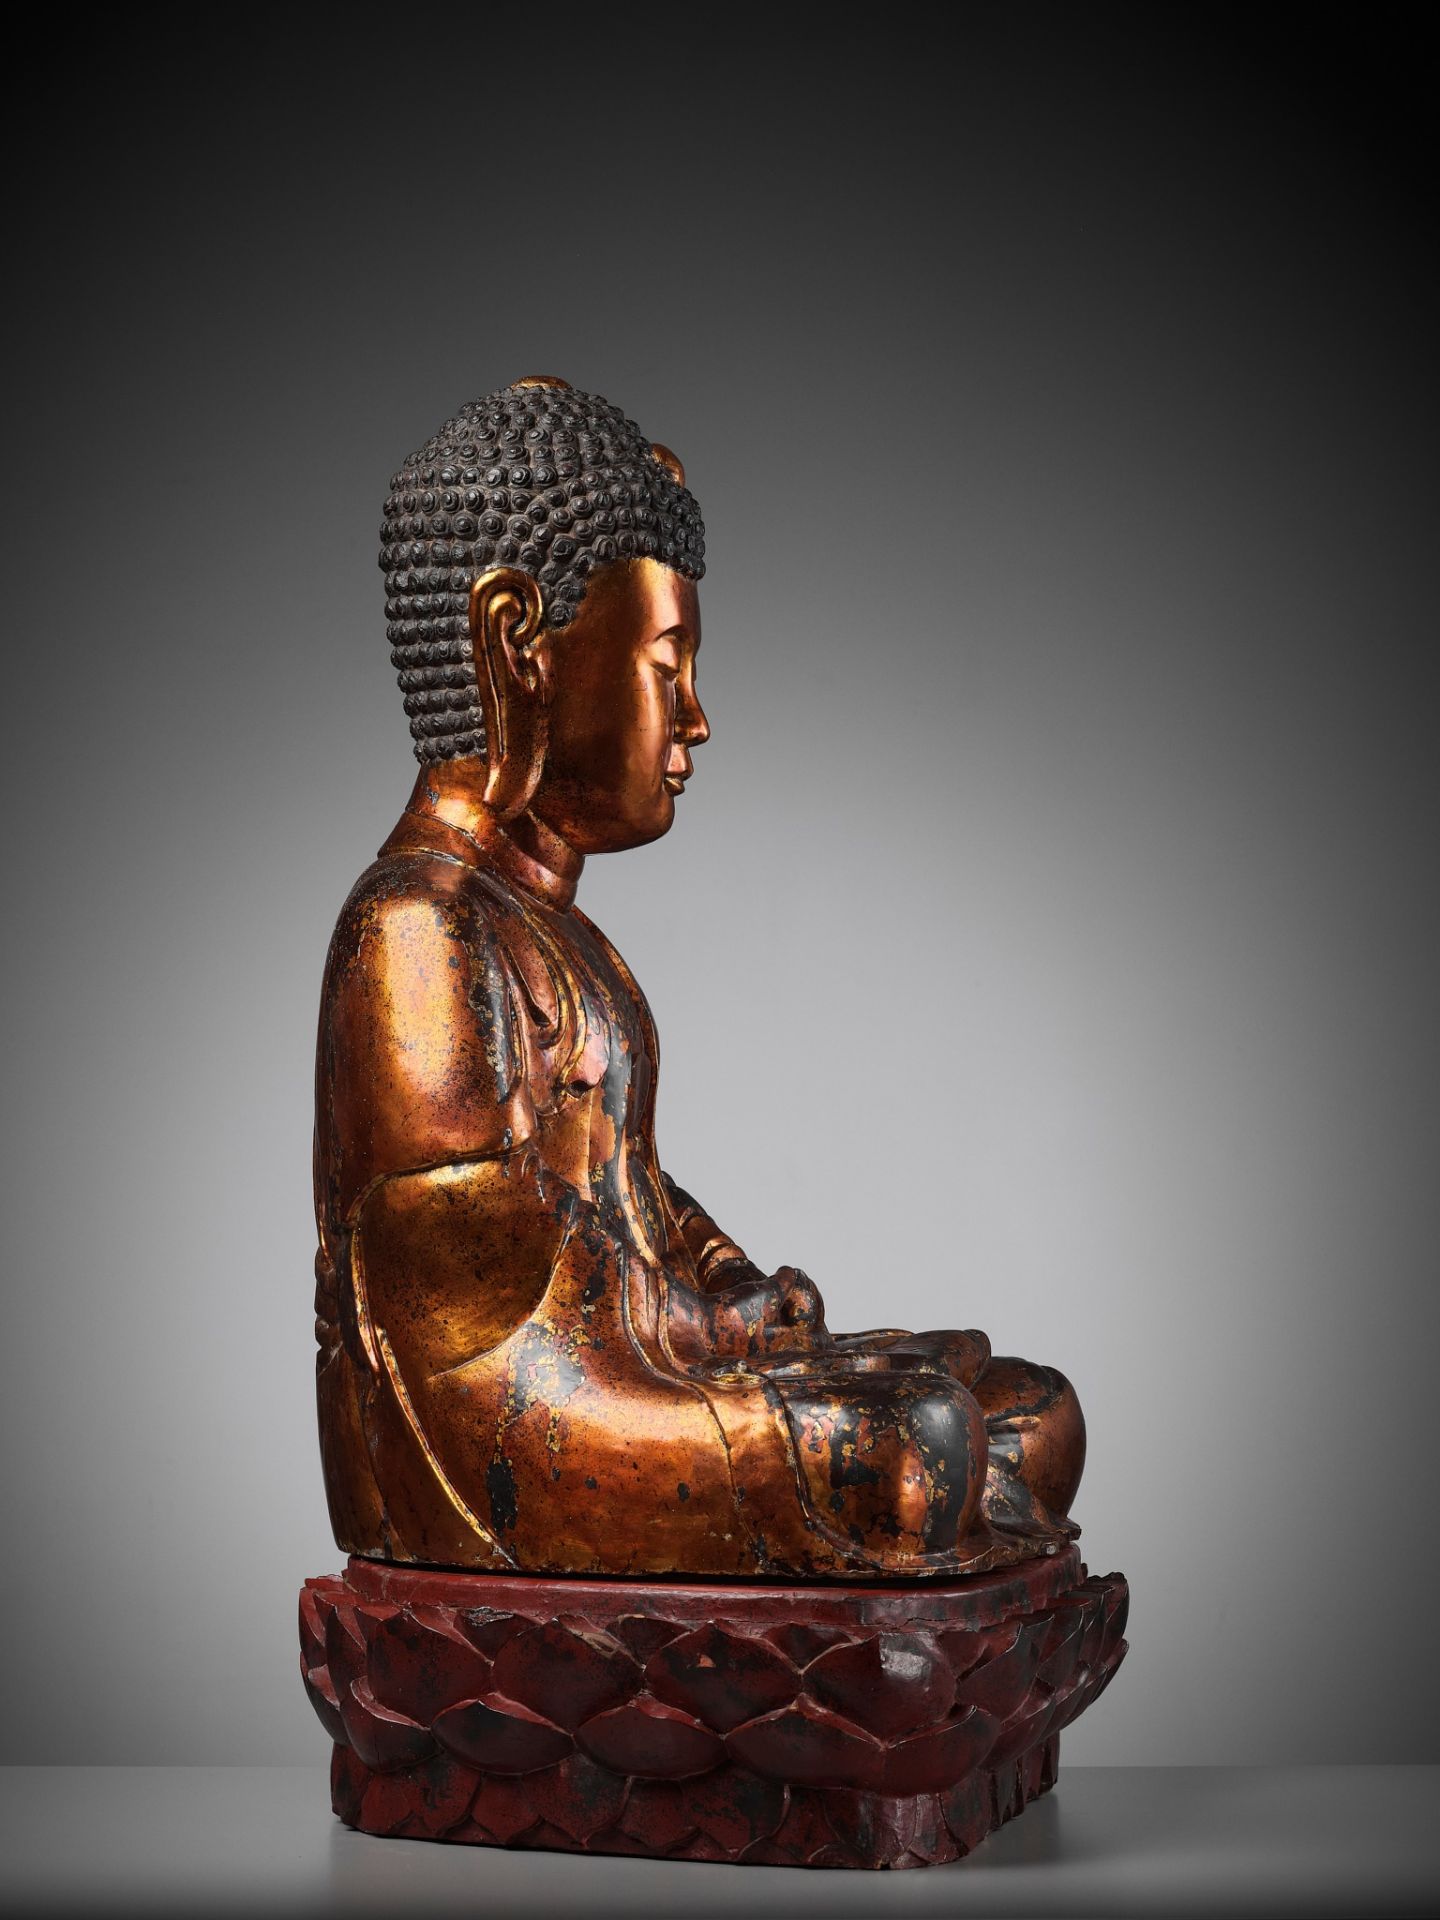 AN EXTRAORDINARY LARGE GILT-LACQUER WOOD STATUE OF BUDDHA, VIETNAM, 17TH-18TH CENTURY - Image 11 of 11